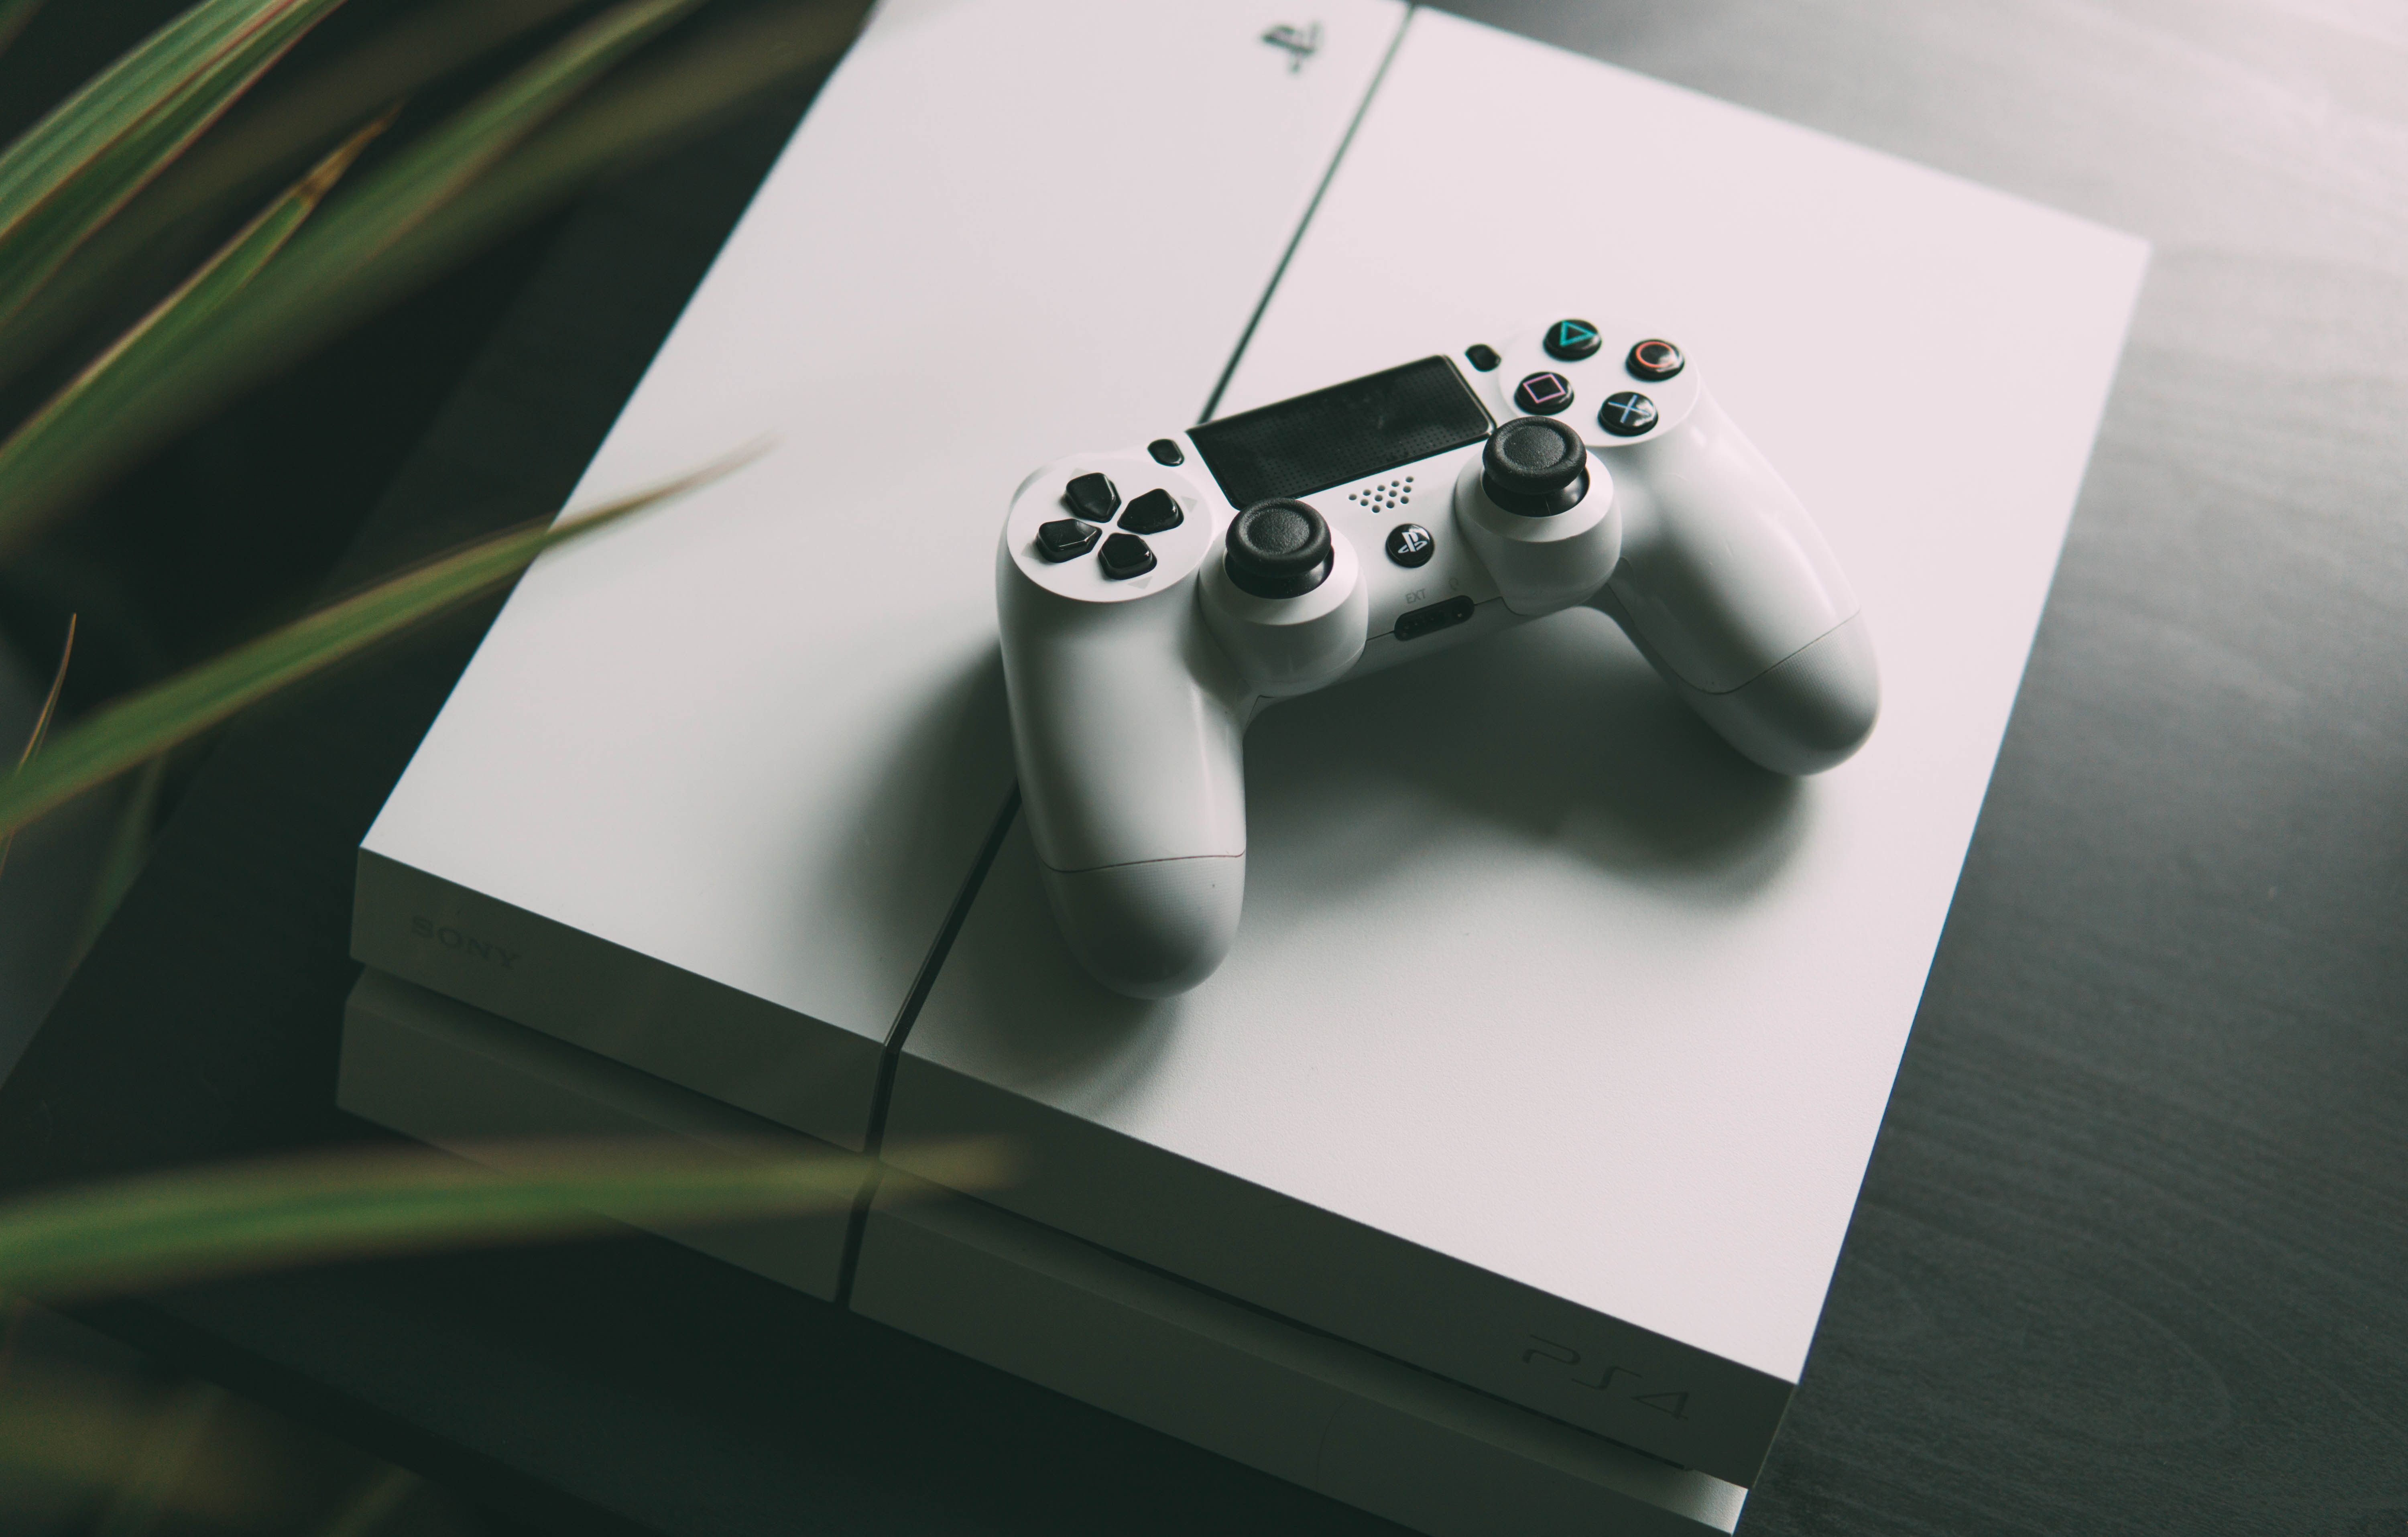 6000x3830 gaming, gamer, bookeh, ps black, tech, video game system, table, desk, leafe, electronic, PNG image, playstation, white, minimalism, video game. Mocah.org HD Wallpaper